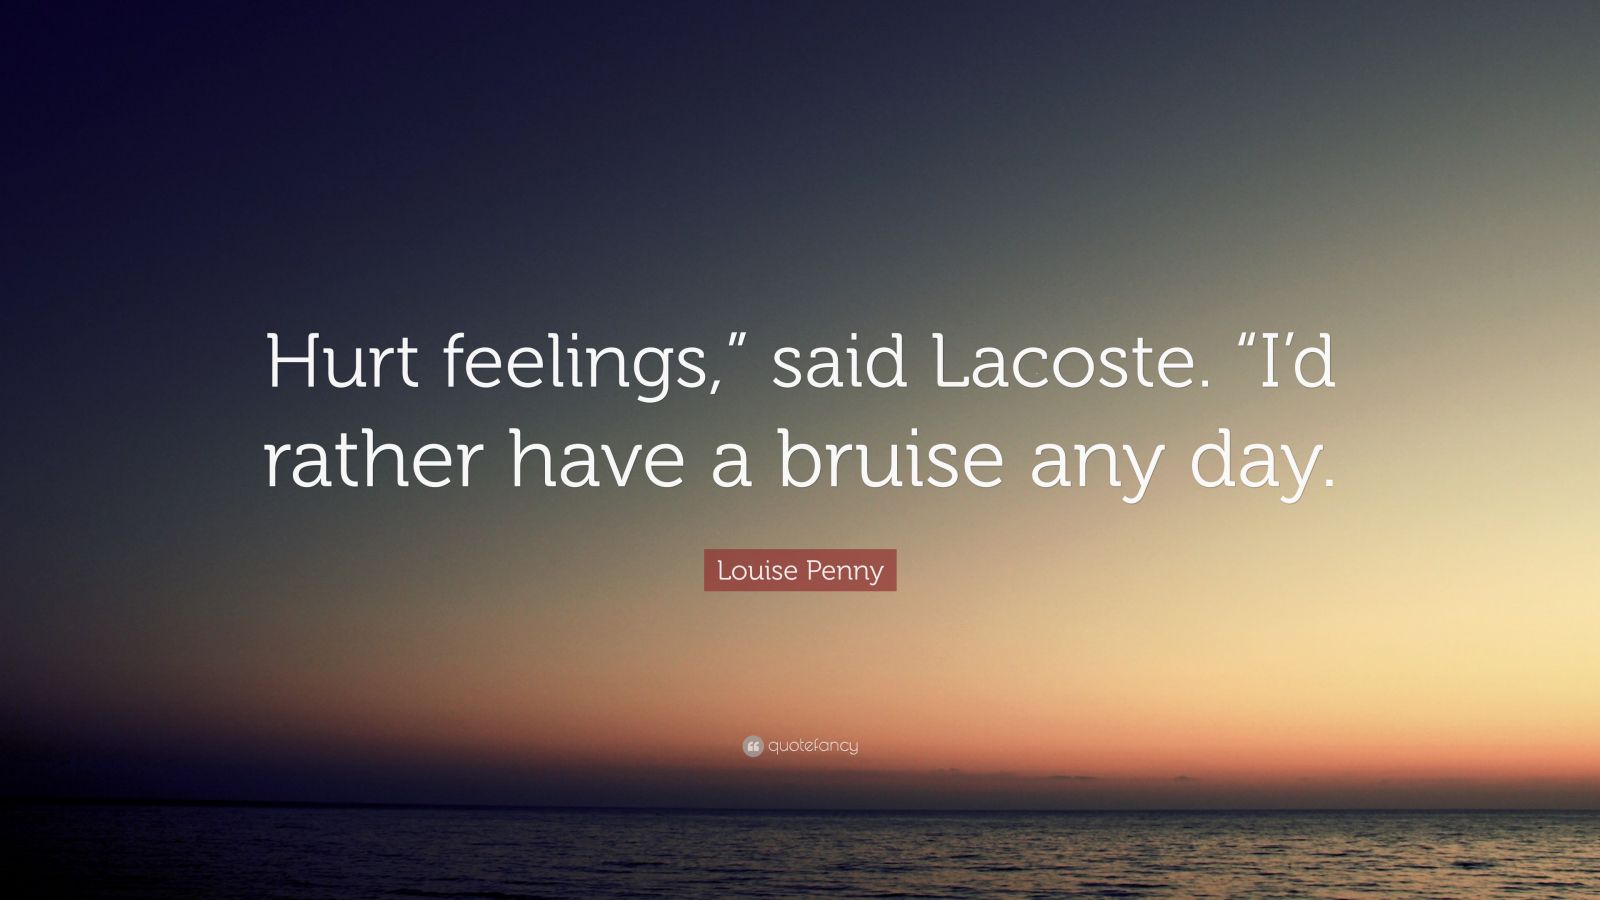 Louise Penny Quotes (335 wallpapers) [Page 2] - Quotefancy